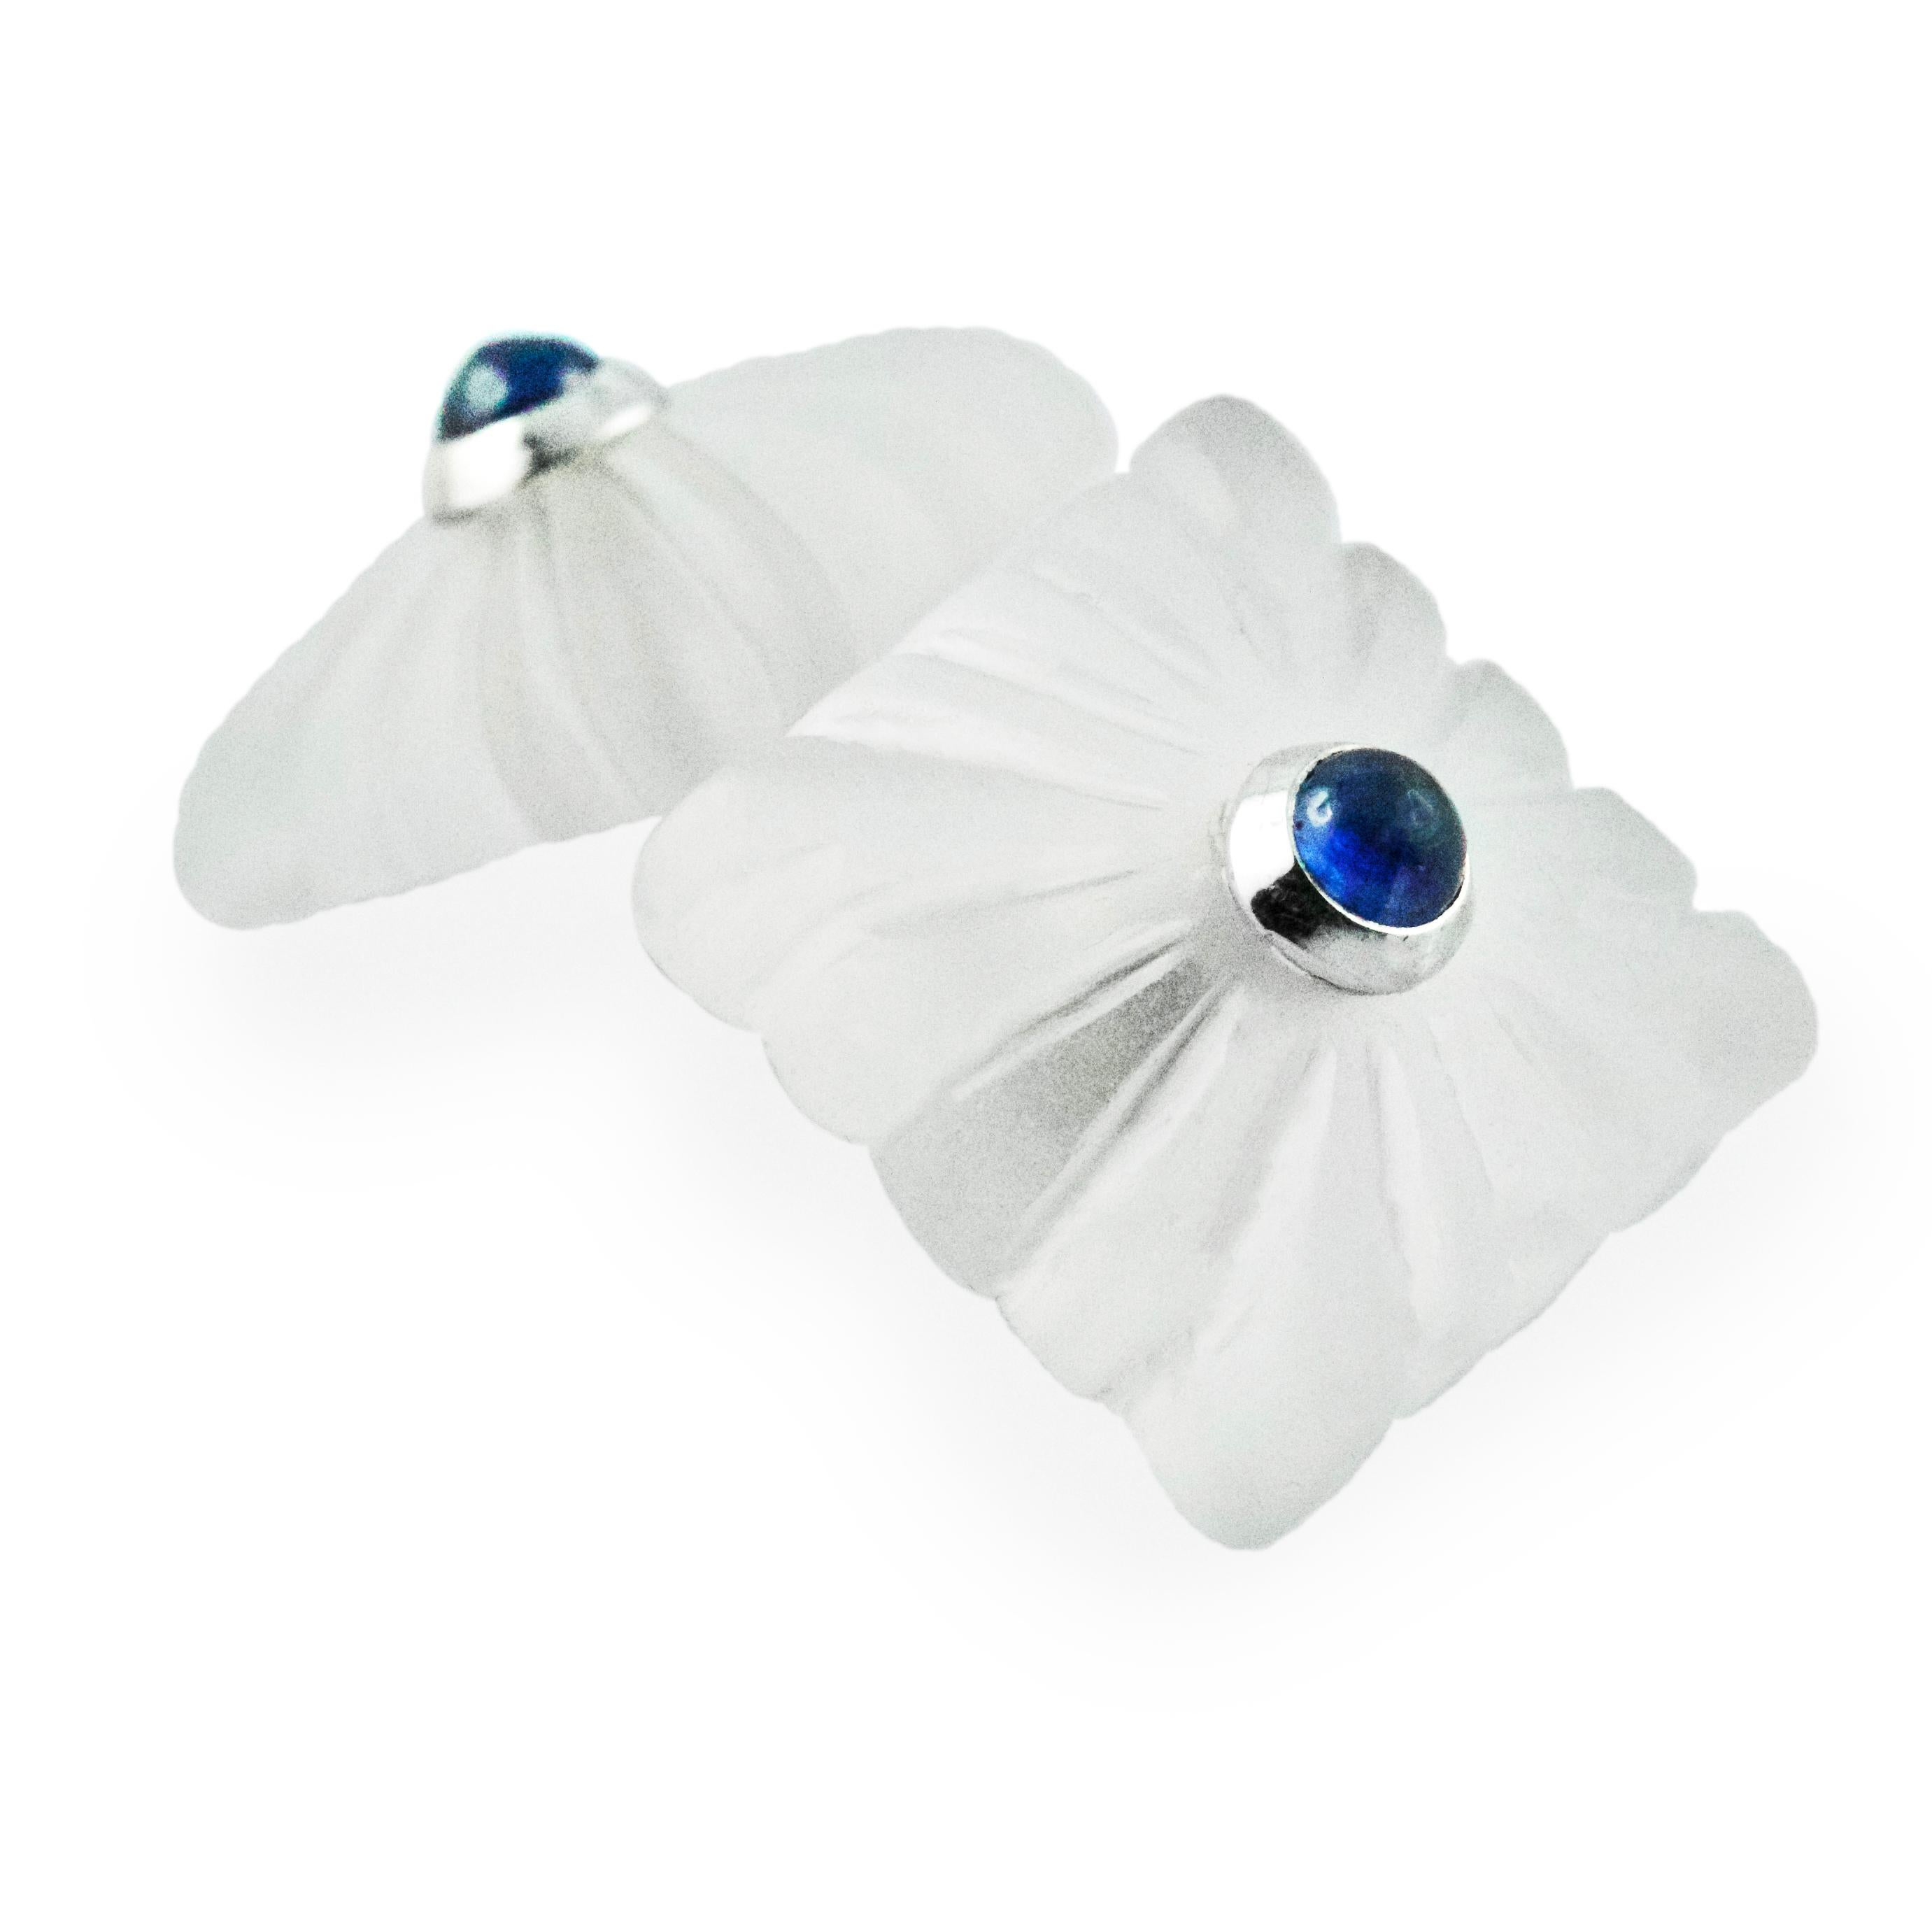 Cabochon 18 Karat White Gold Sapphires Carved Frosted Rock Crystal Cufflinks For Sale